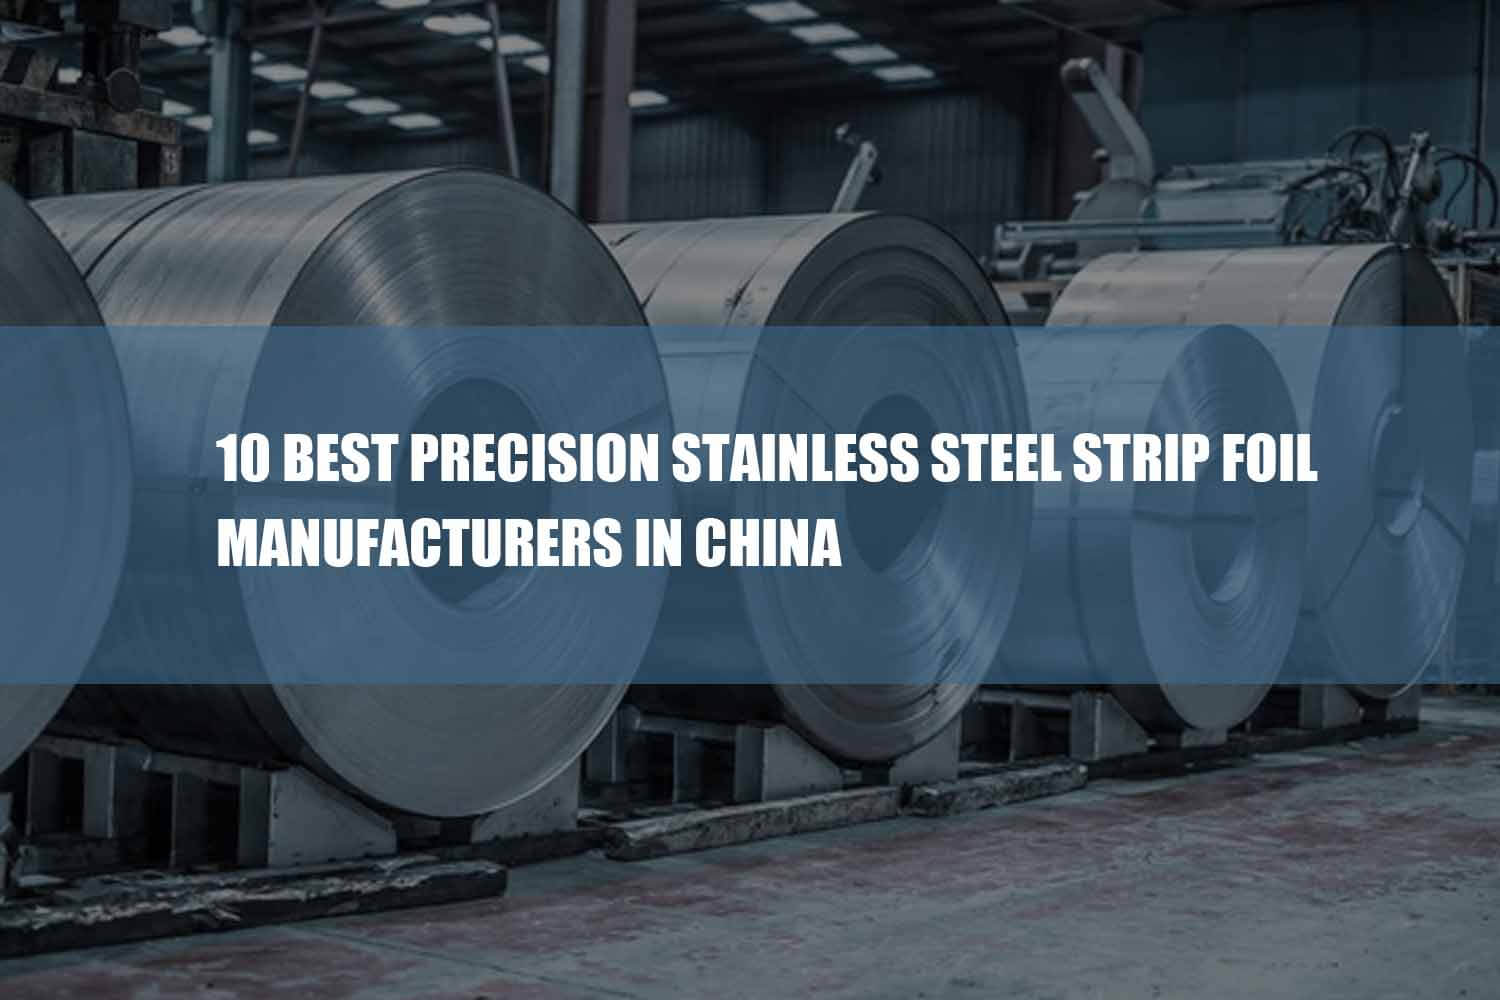 10 best precision stainless steel strip foil manufacturers